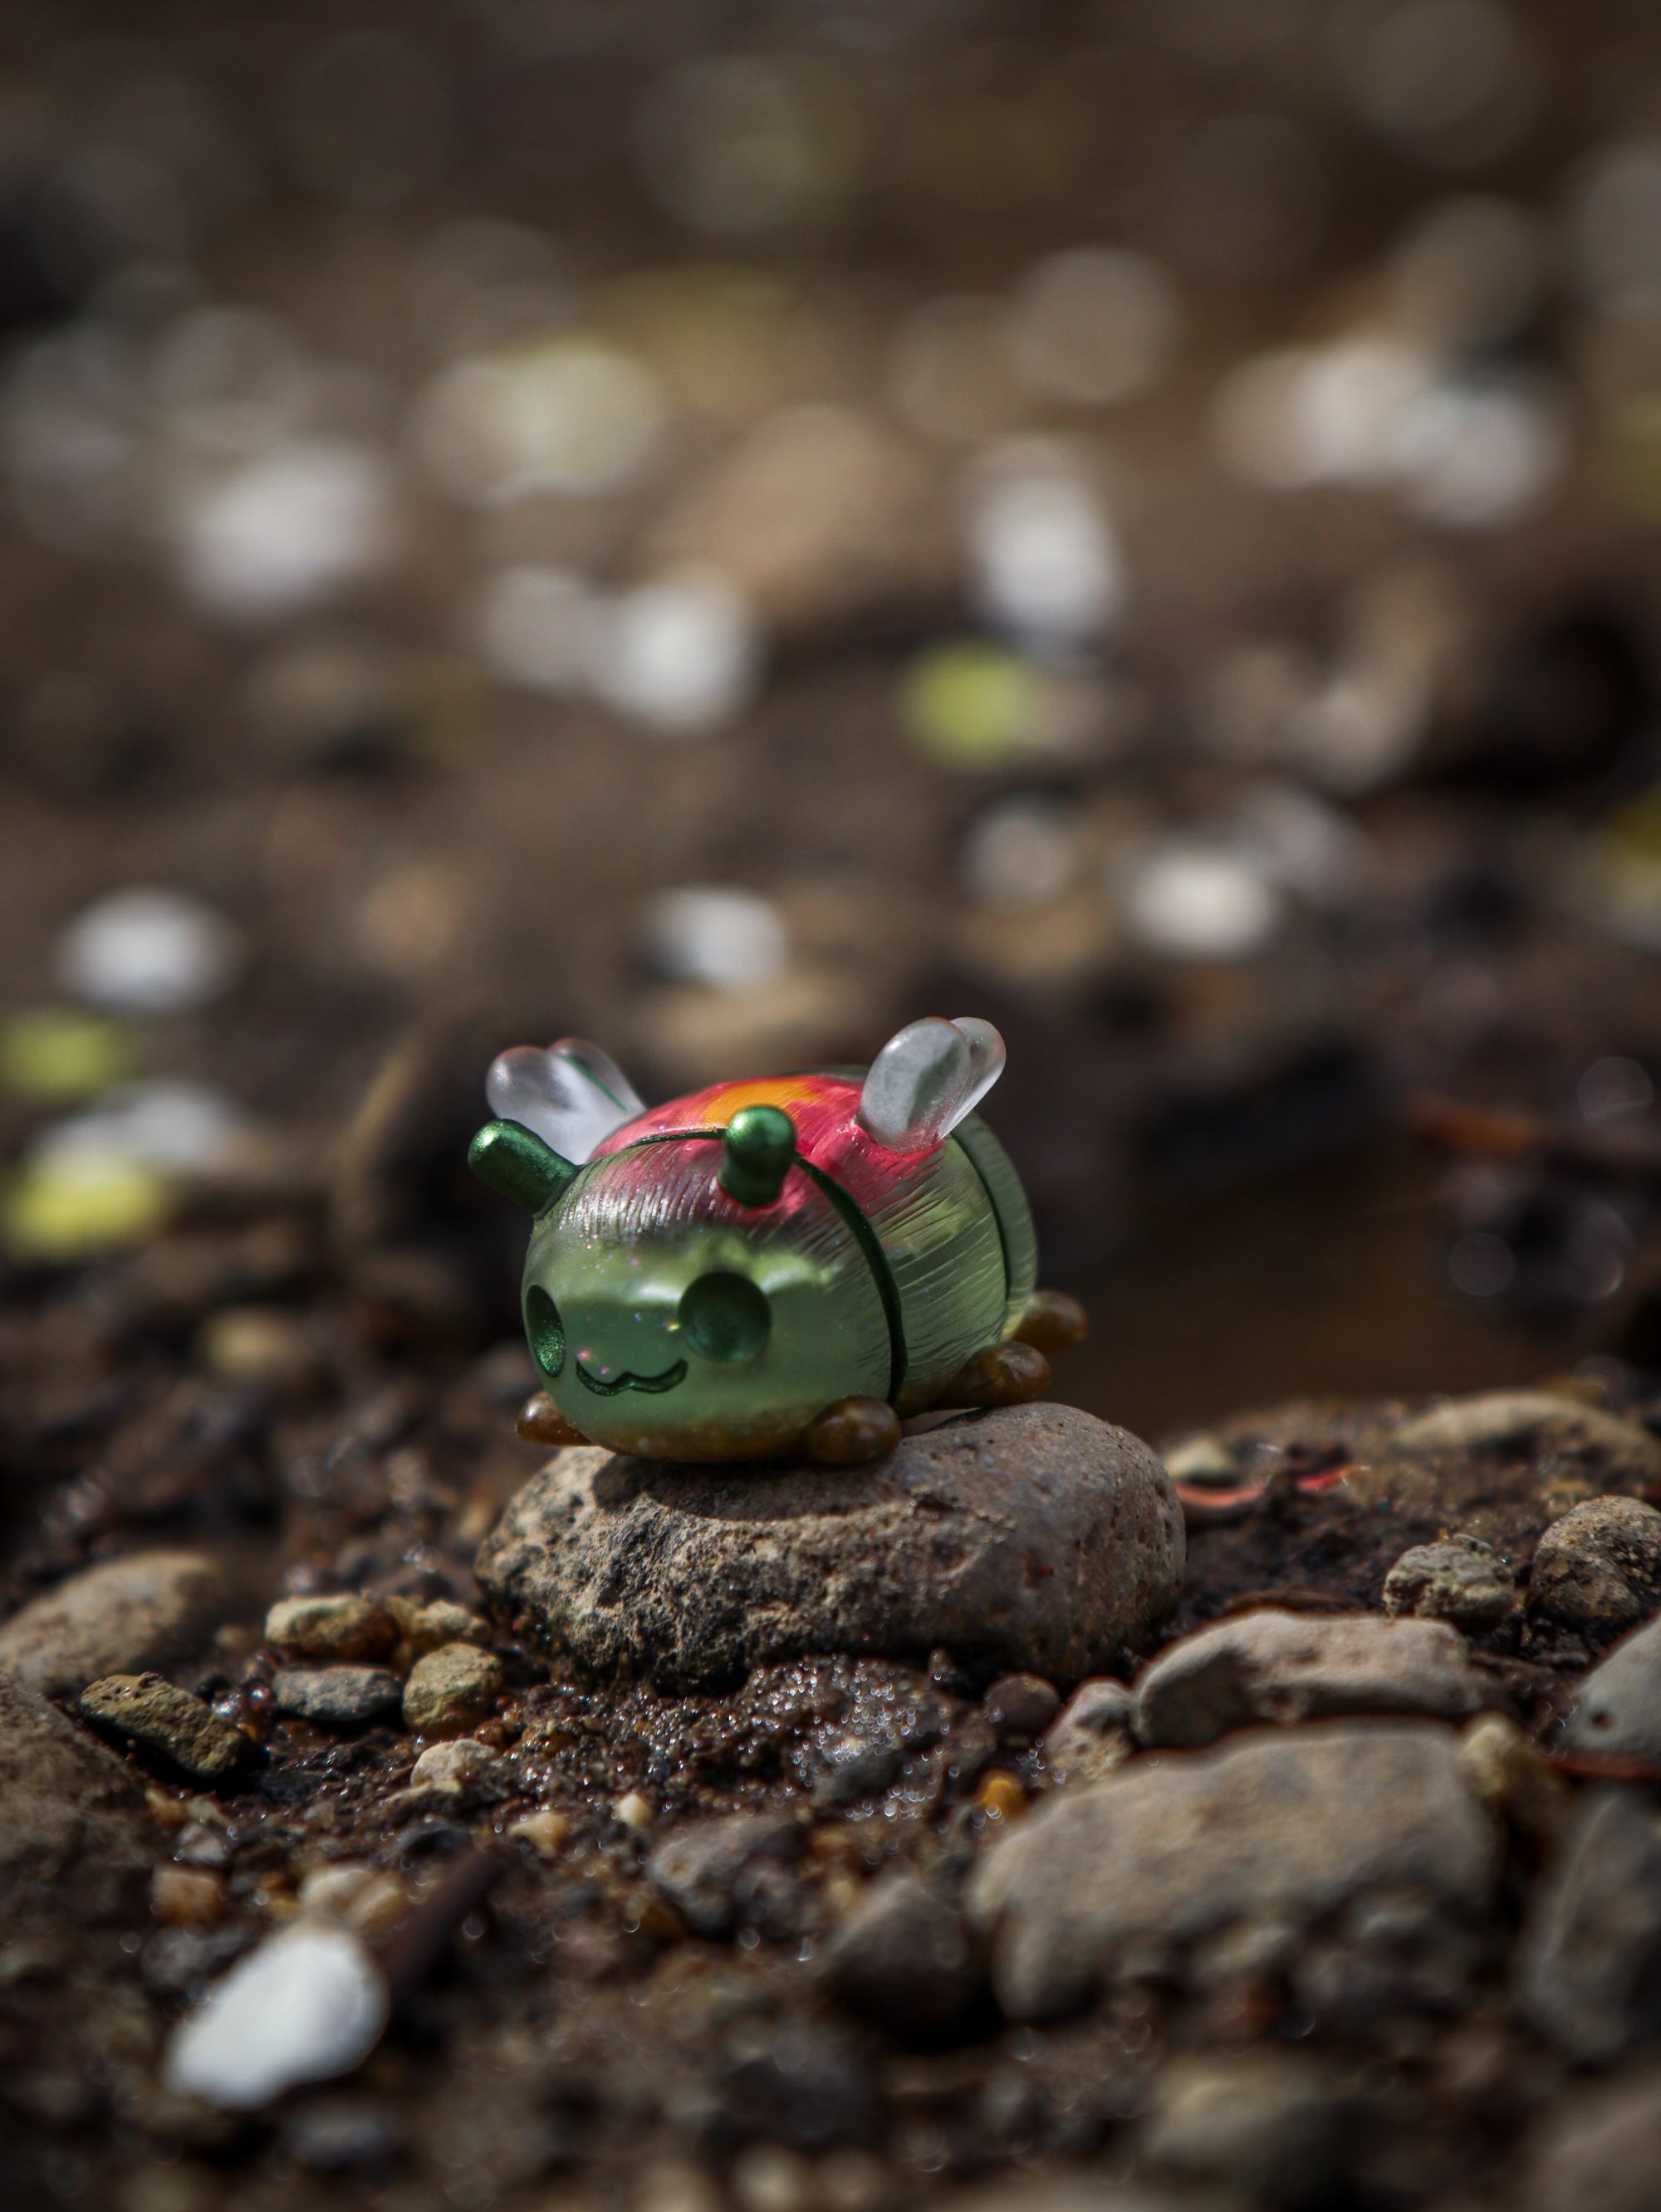 A toy bug on a rock, part of the Little Shit Big Deal - GRUBLETS collection by Fairies And Fancies. Polymer Clay and Resin material, 1 1/2 inches tall.